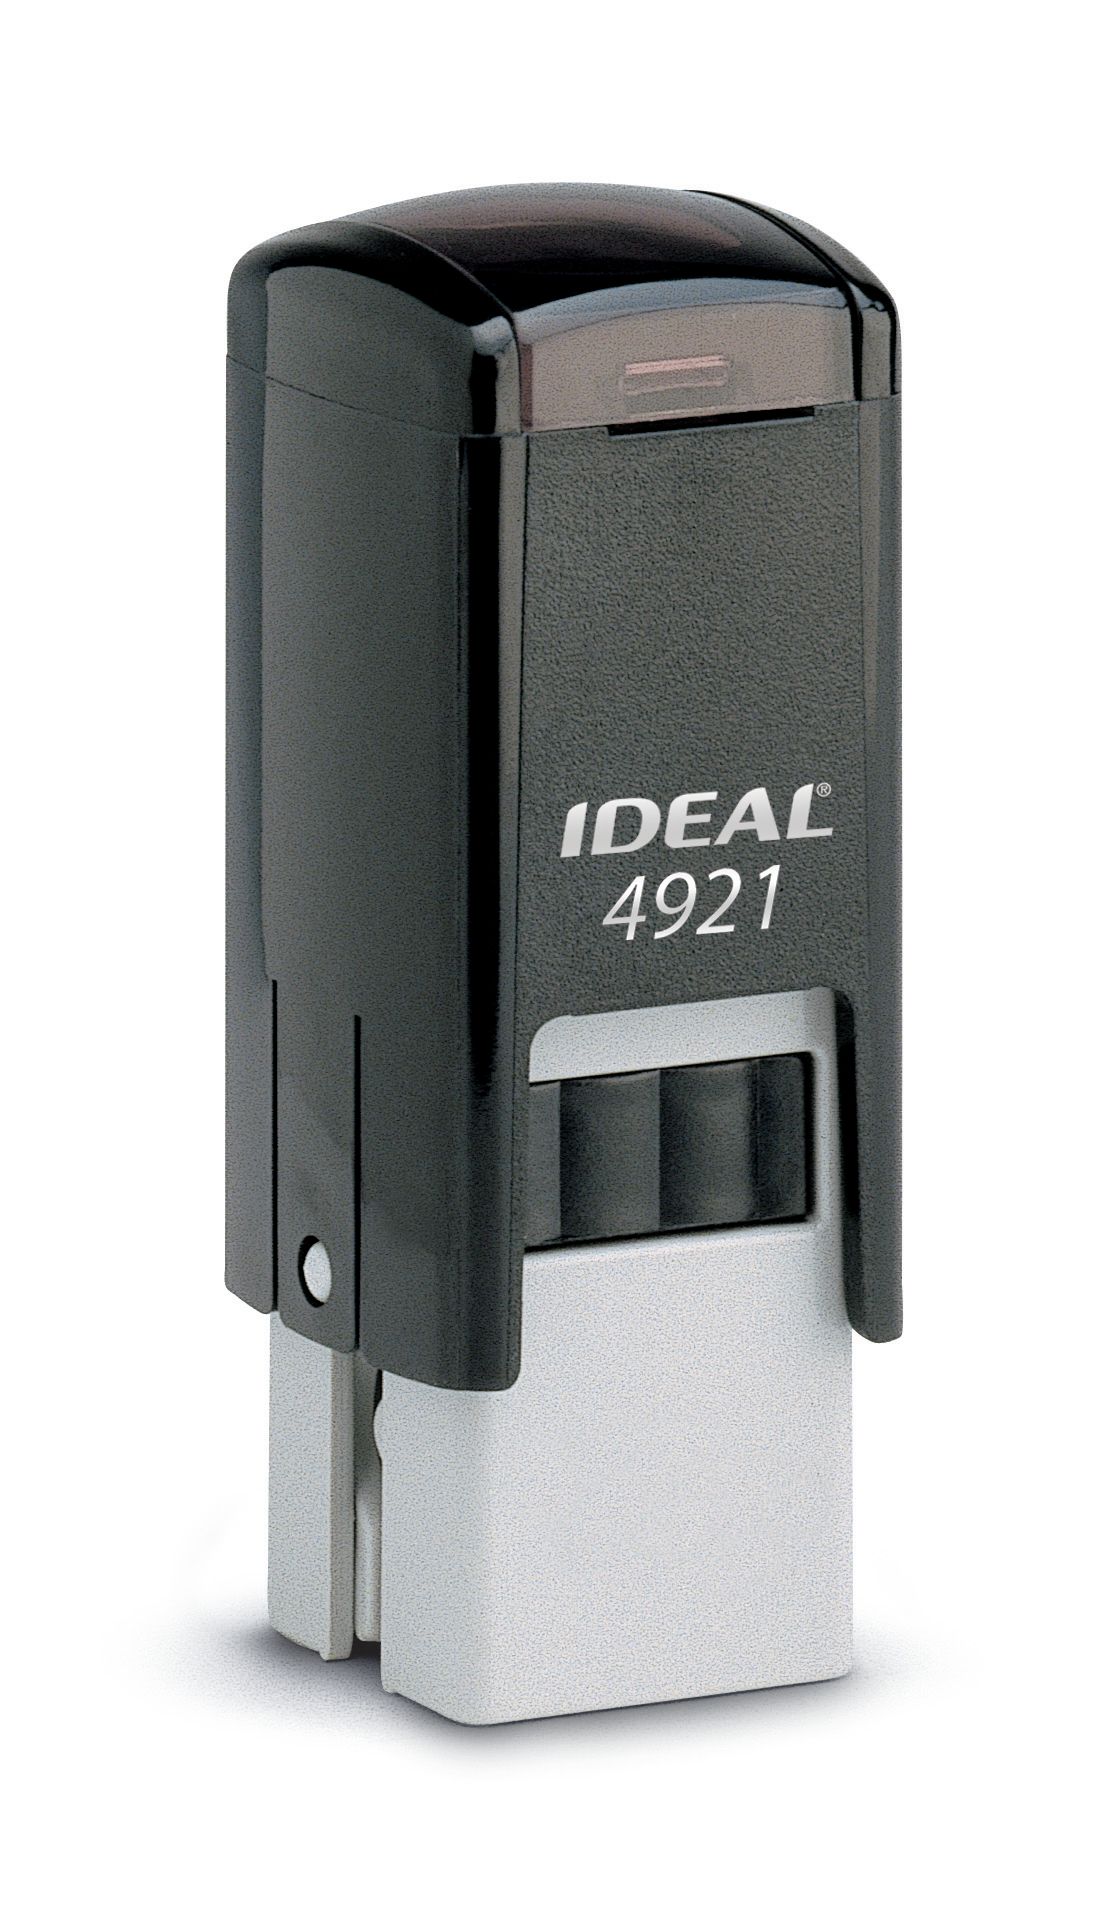 Ideal 4921 Self Inking Stamp